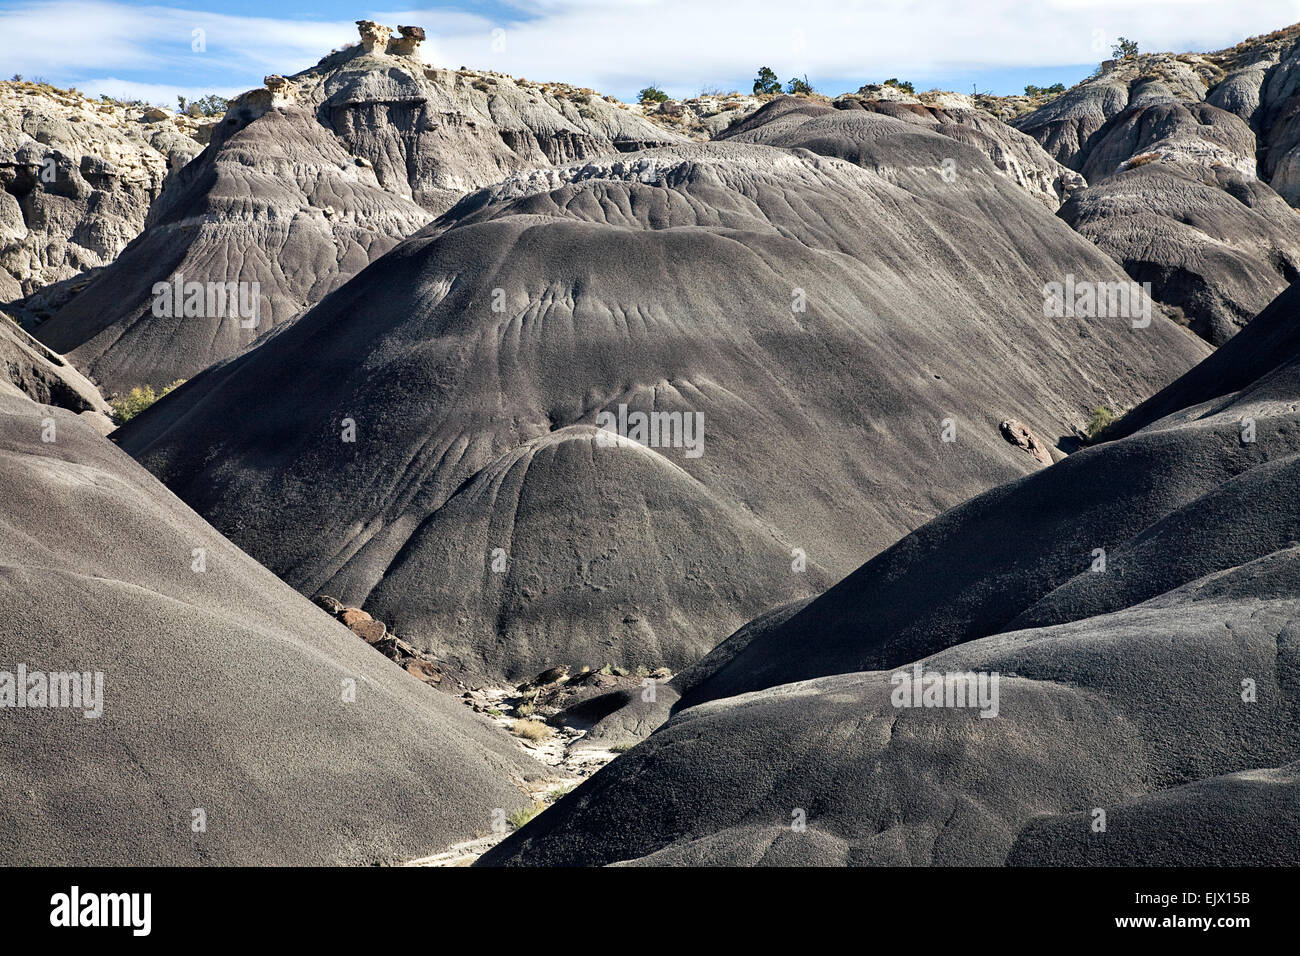 The Black Place is a famous location in northwest New Mexico that inspired some of Georgia O'Keefe's abstract landscapes. Stock Photo